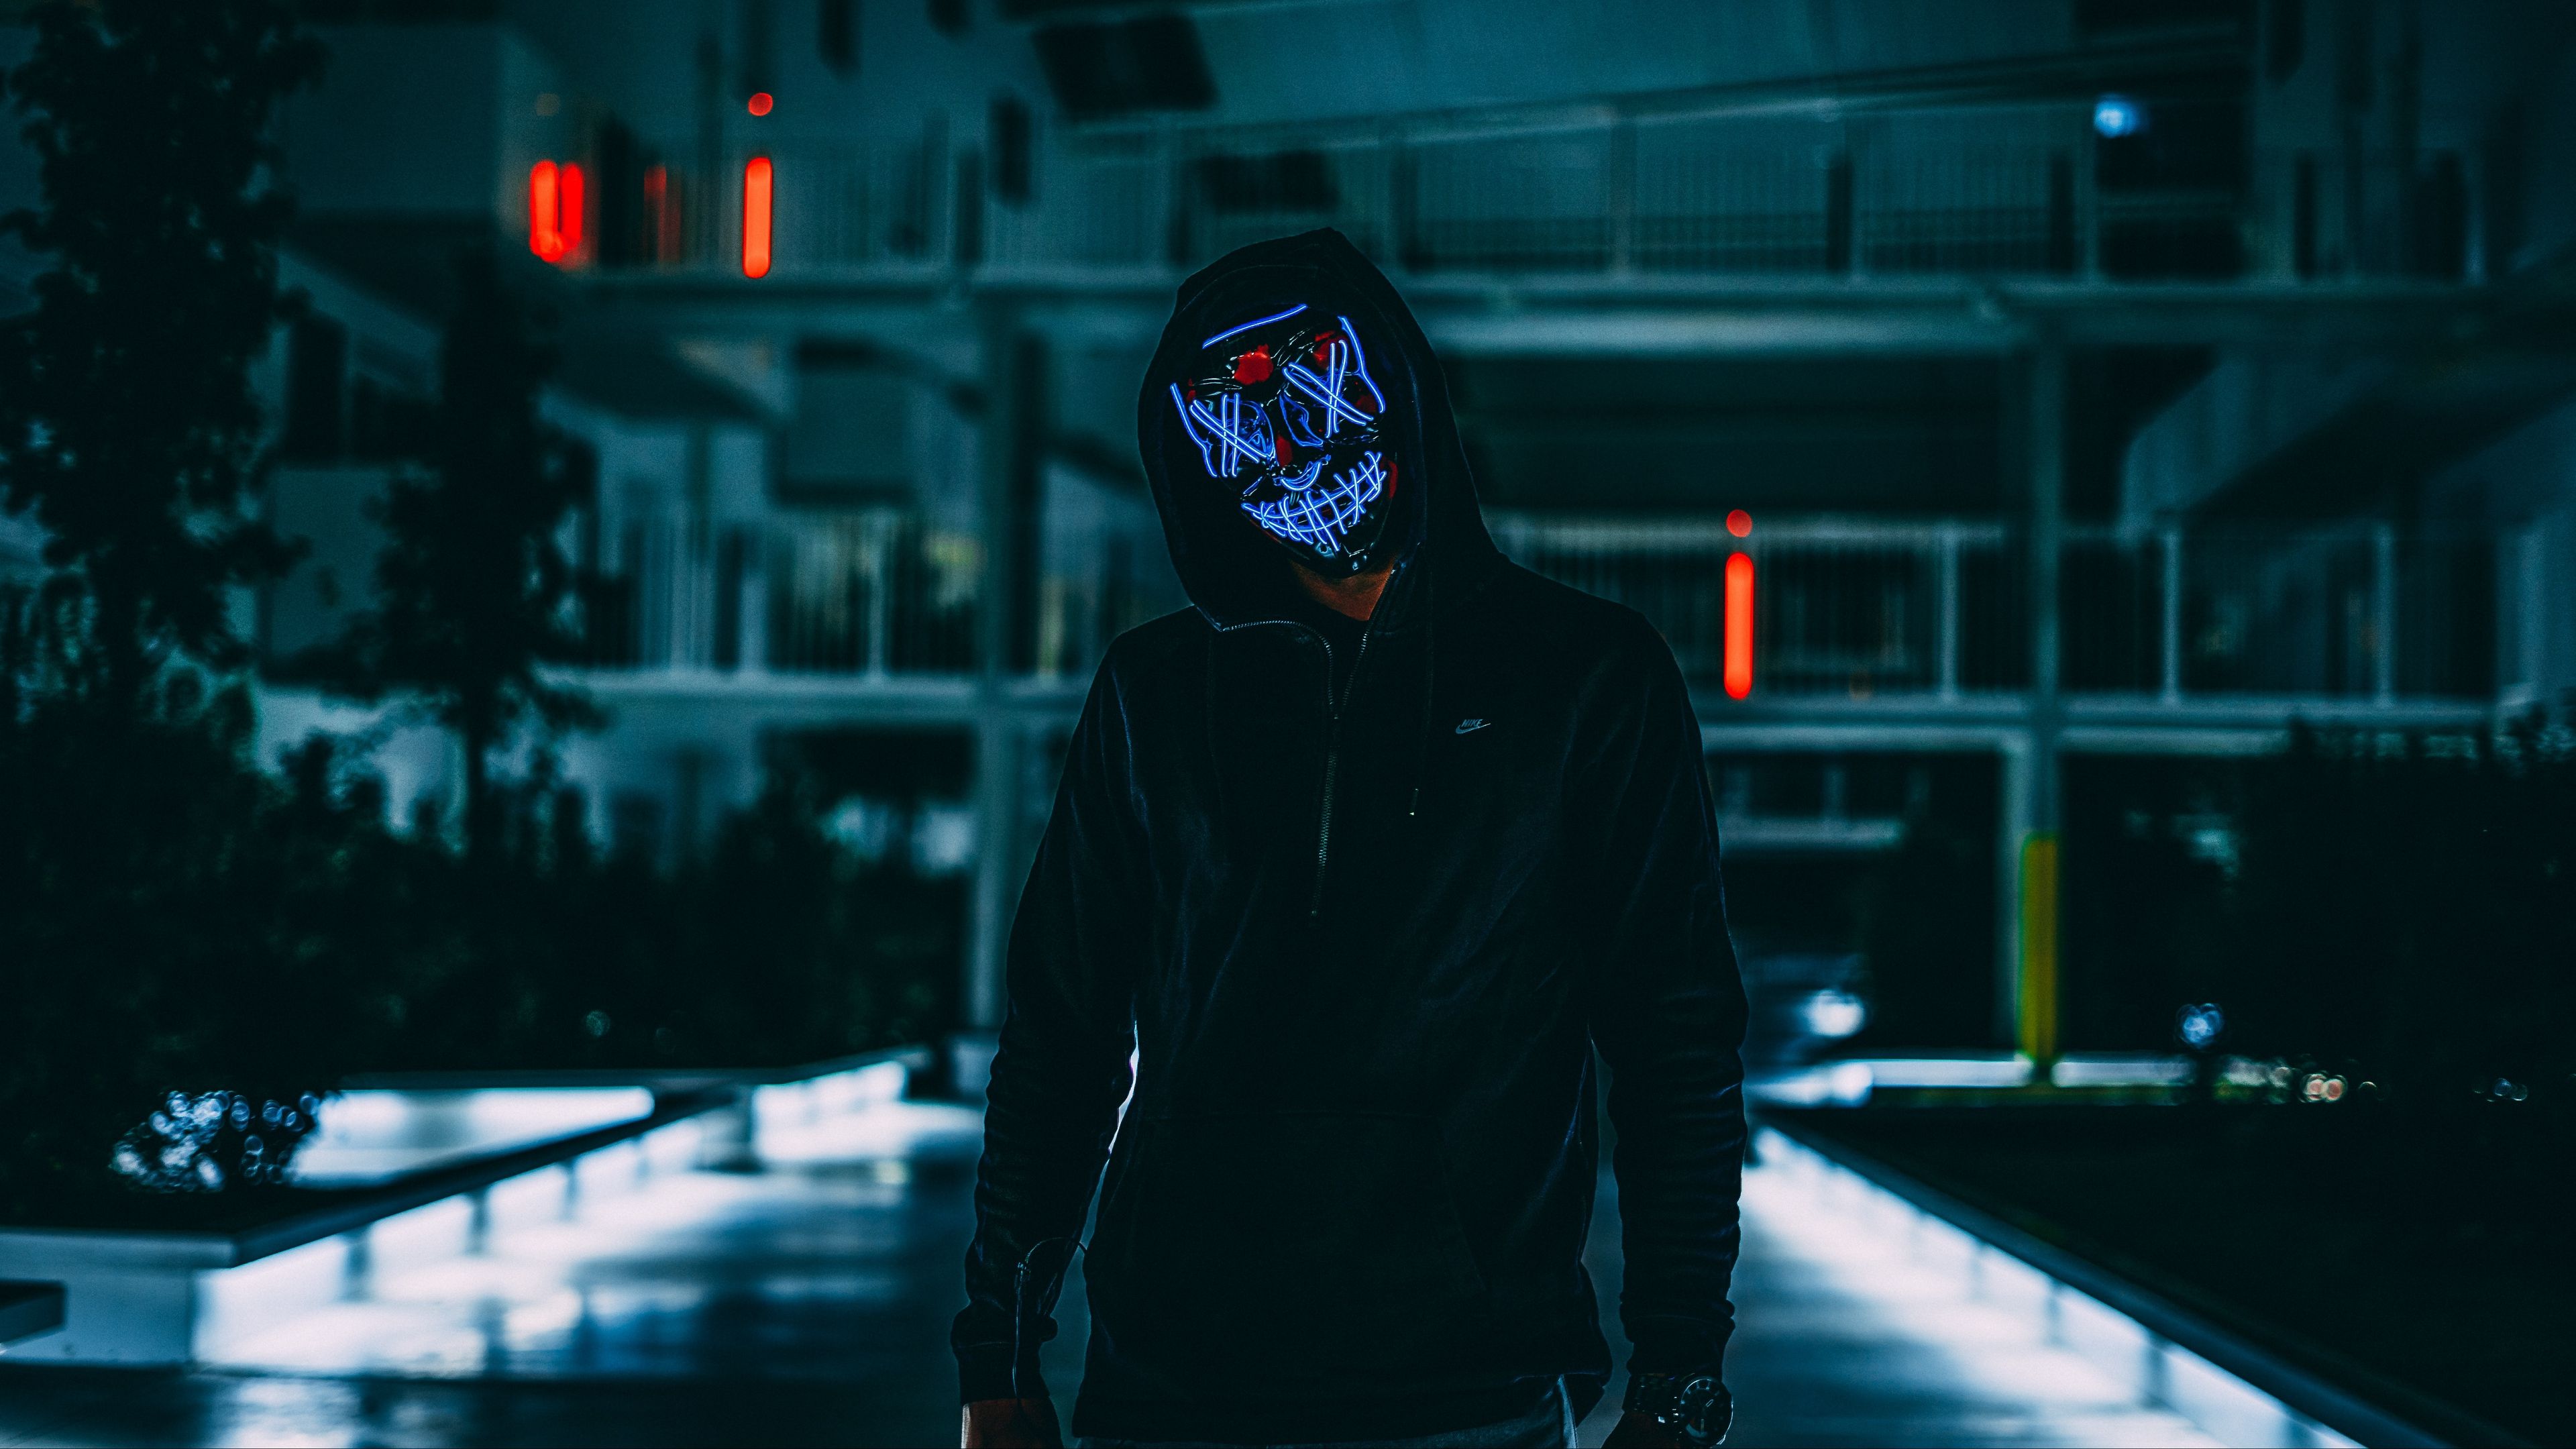 Download Neon Mask Wallpapers 4K UHD - LED Purge Mask Free for Android - Neon  Mask Wallpapers 4K UHD - LED Purge Mask APK Download - STEPrimo.com